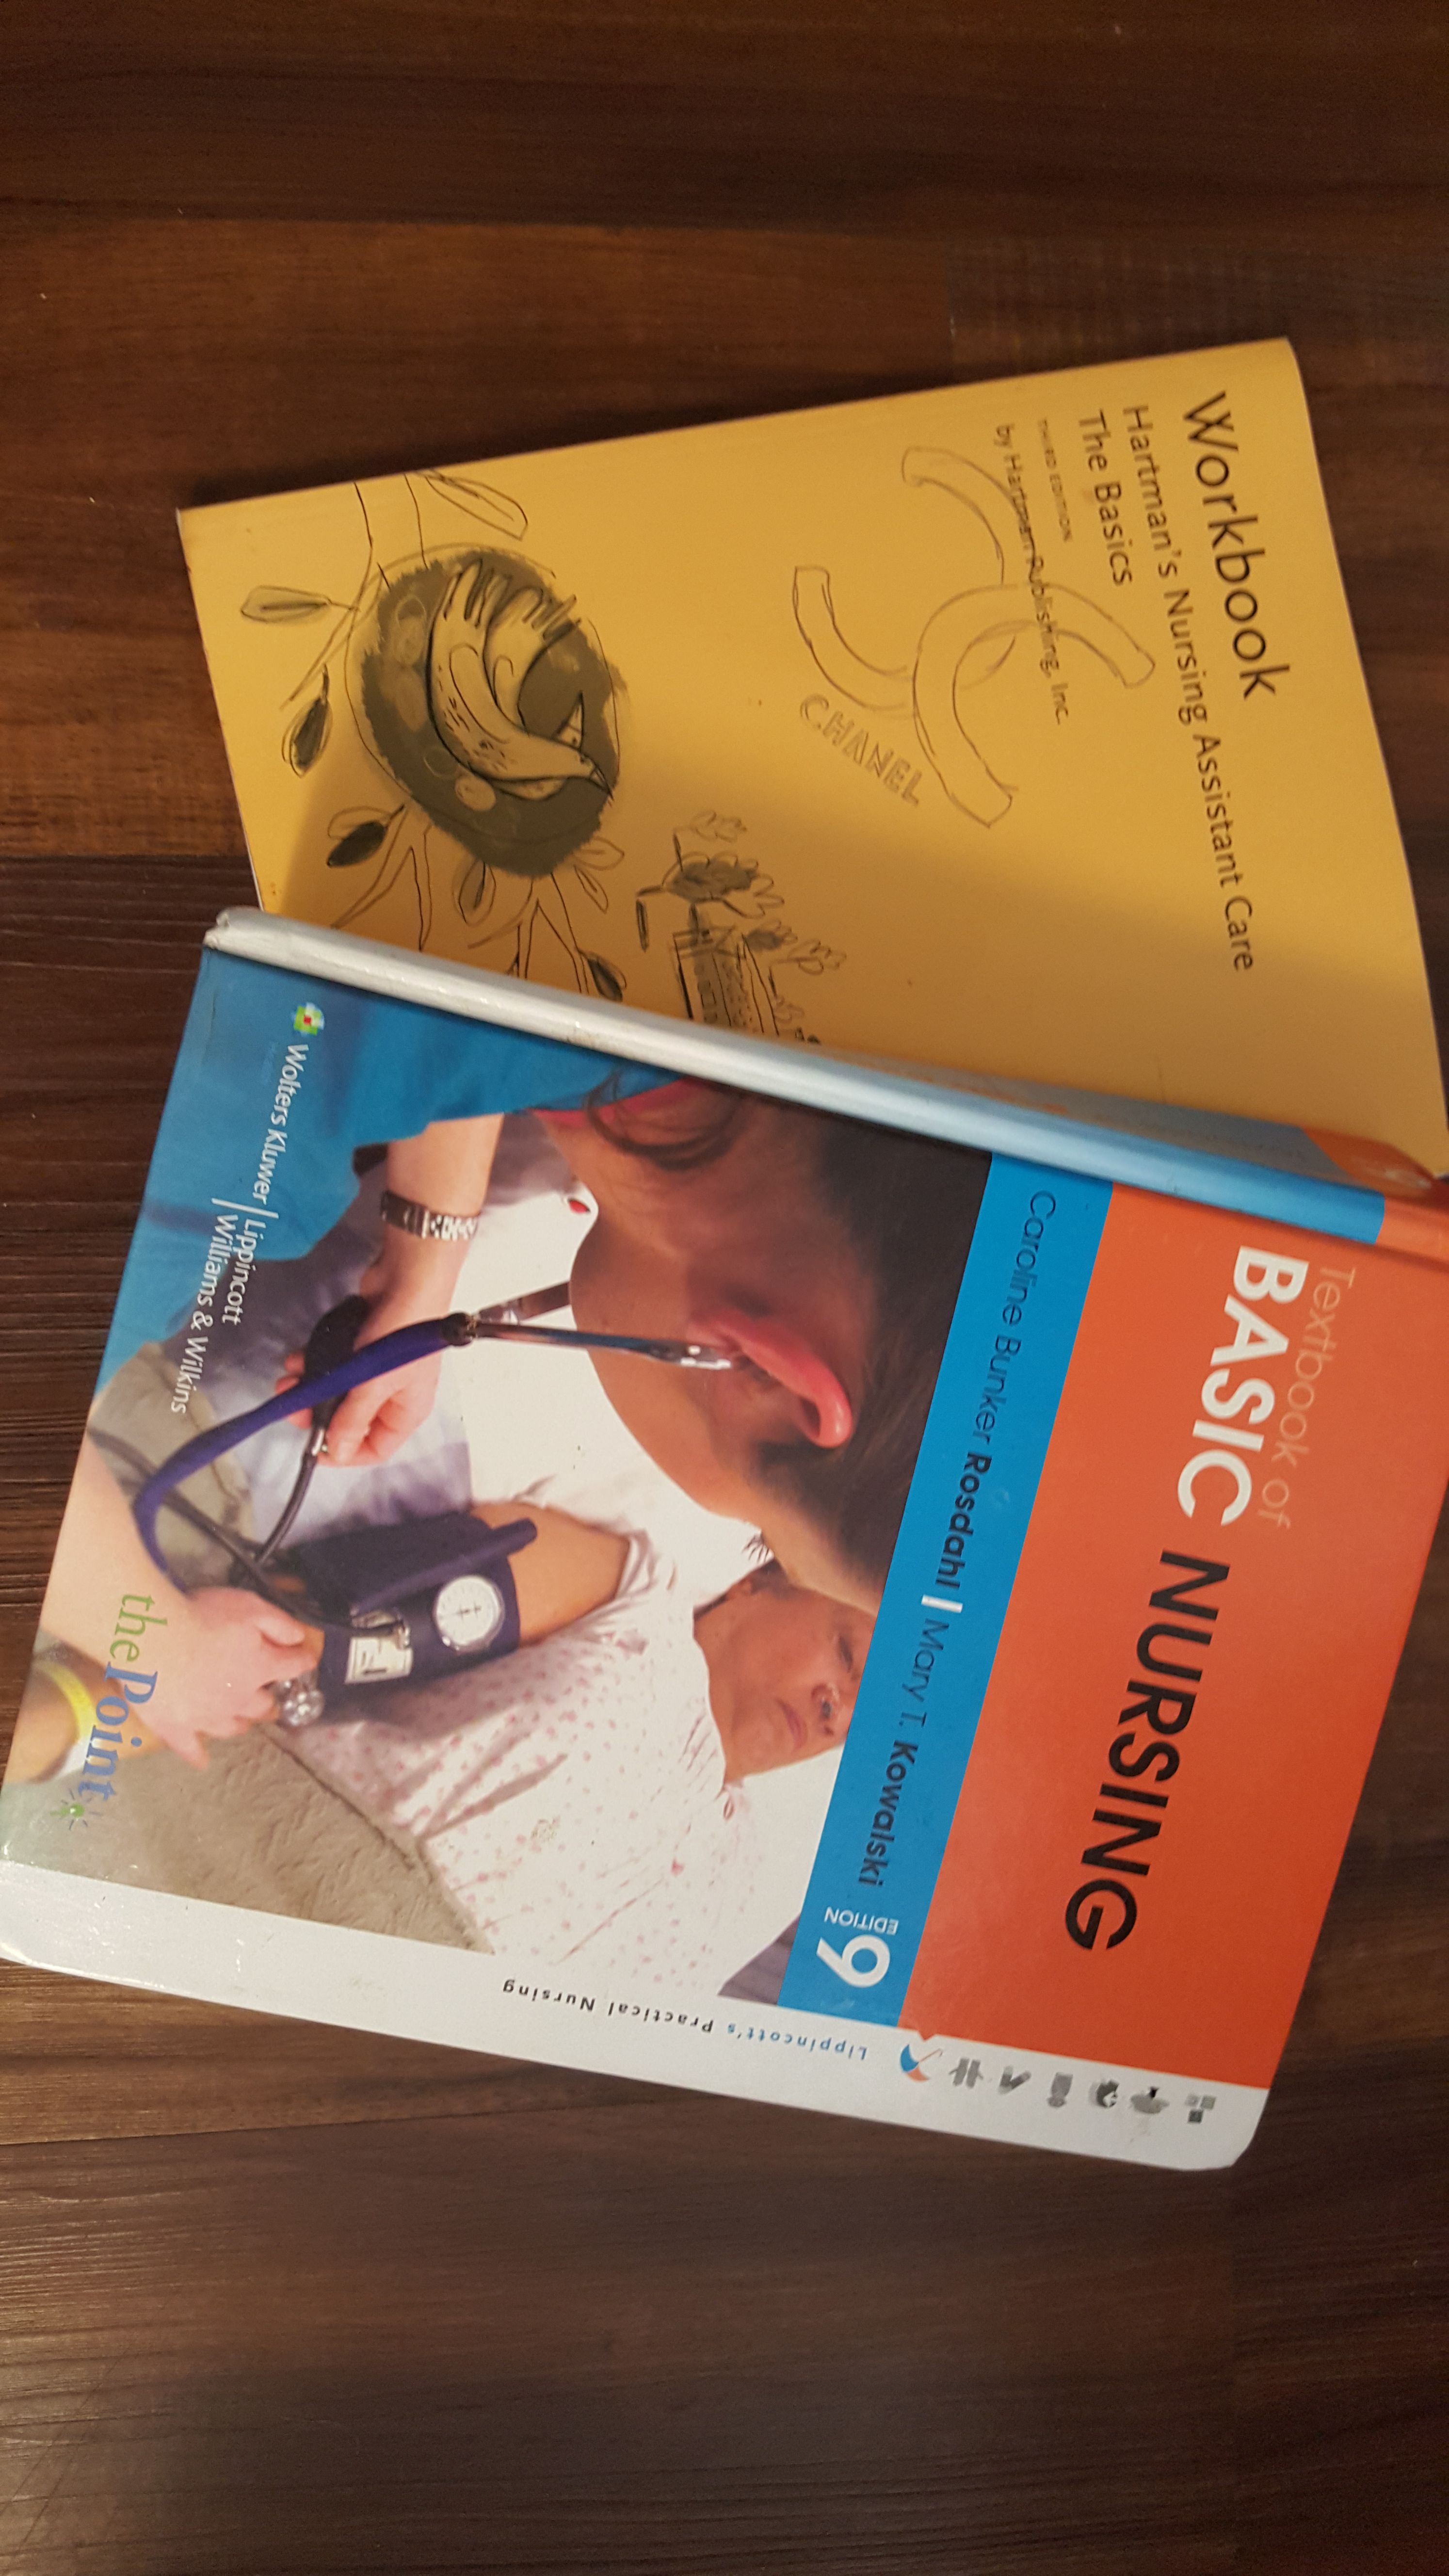 Basic Nursing 9th Edition and work book